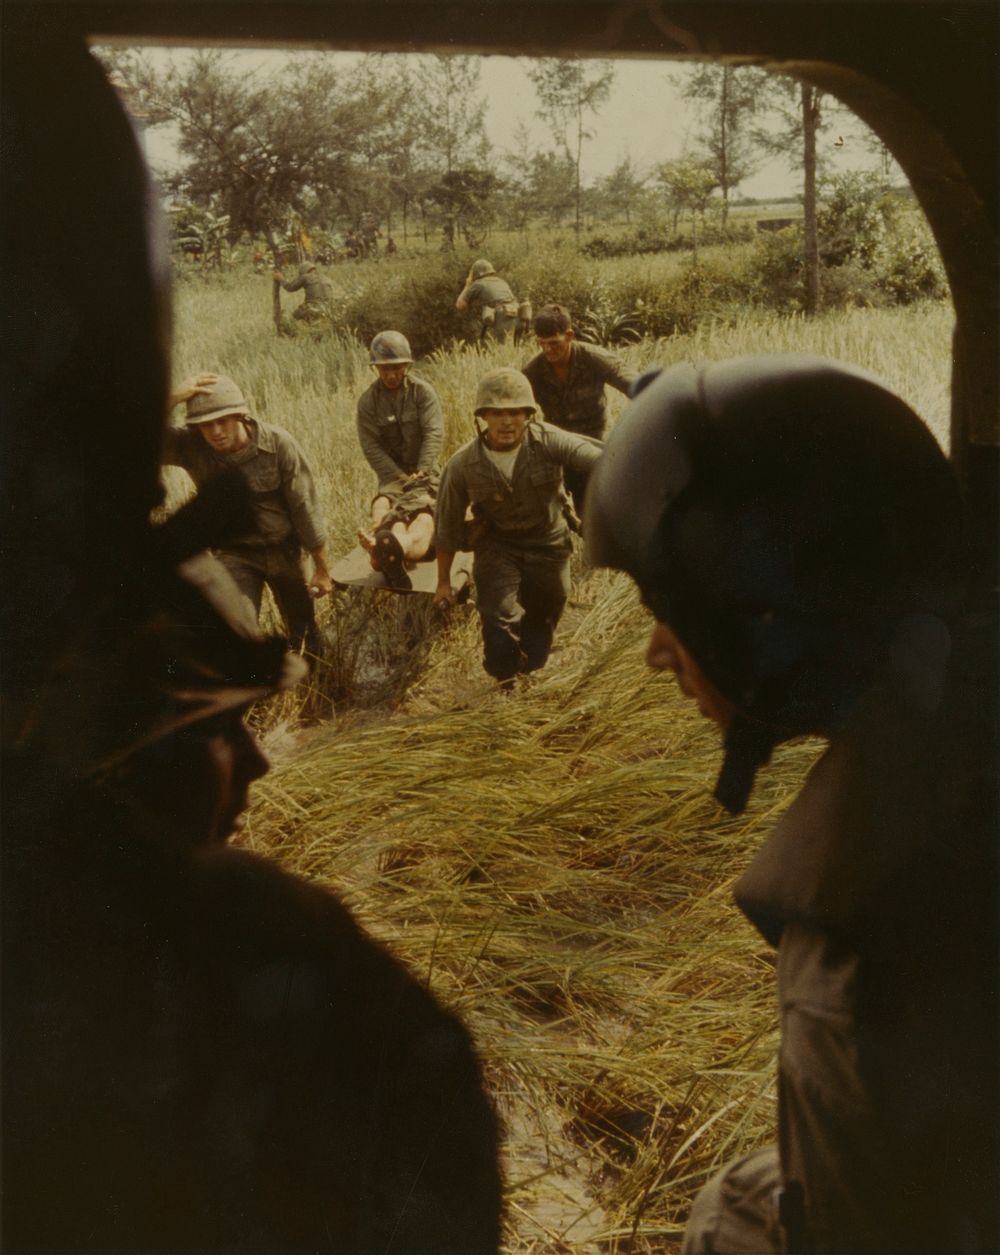 Phu Bai, Vietnam - A battle casualty of the 1st battalion, 4th Marines, is brought to a helicopter for evacuation.